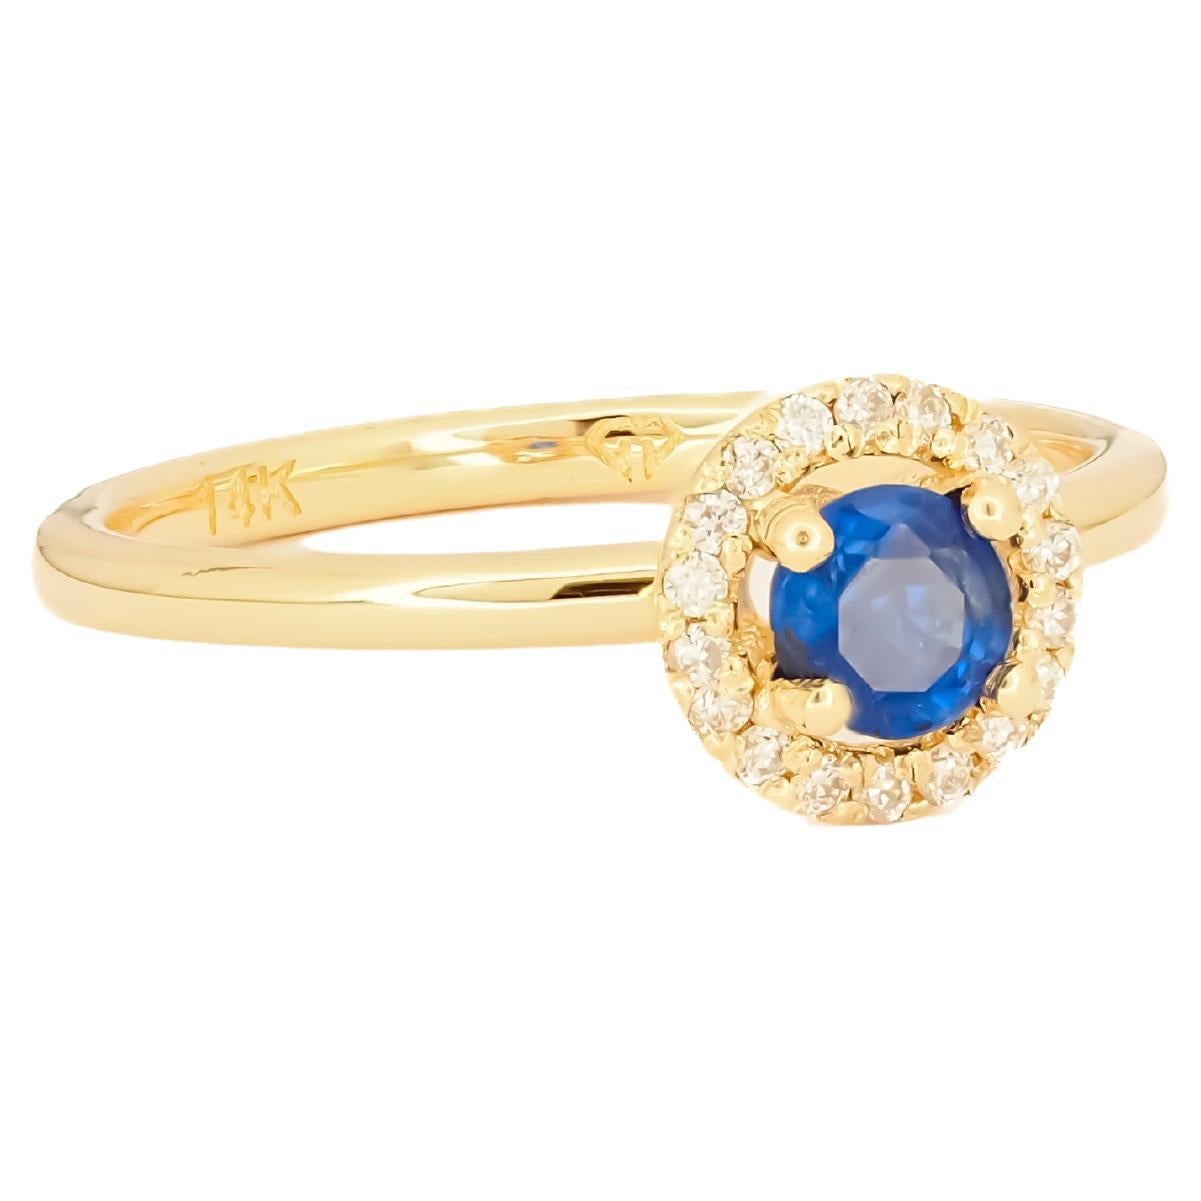 Halo Sapphire Ring with Diamonds in 14 Karat Gold, Sapphire Gold Ring